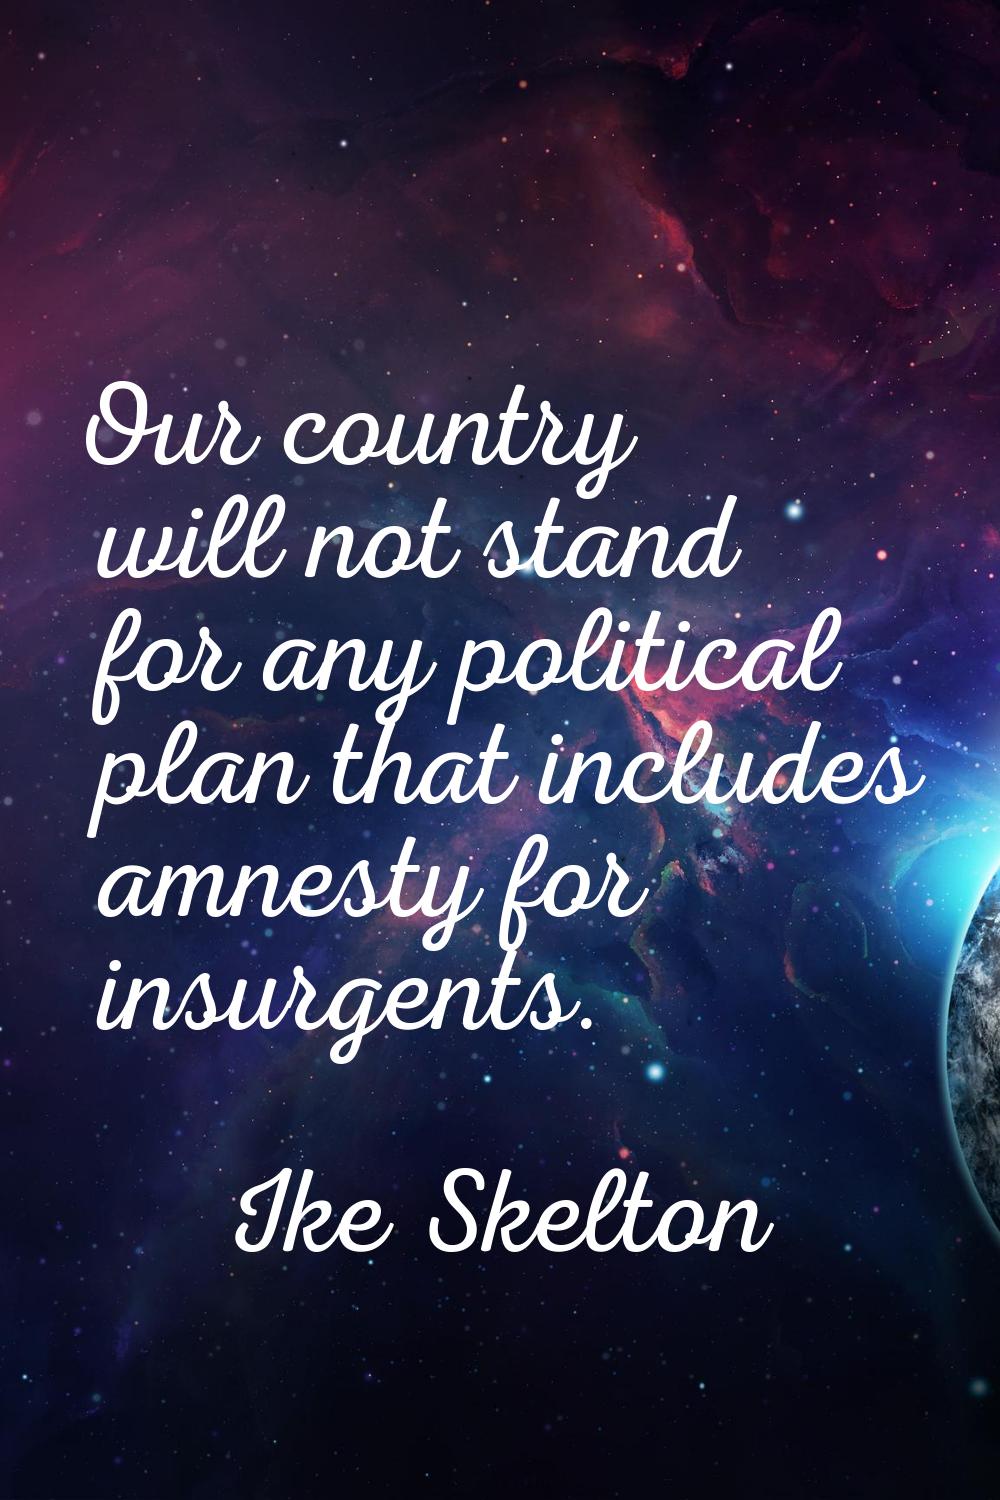 Our country will not stand for any political plan that includes amnesty for insurgents.